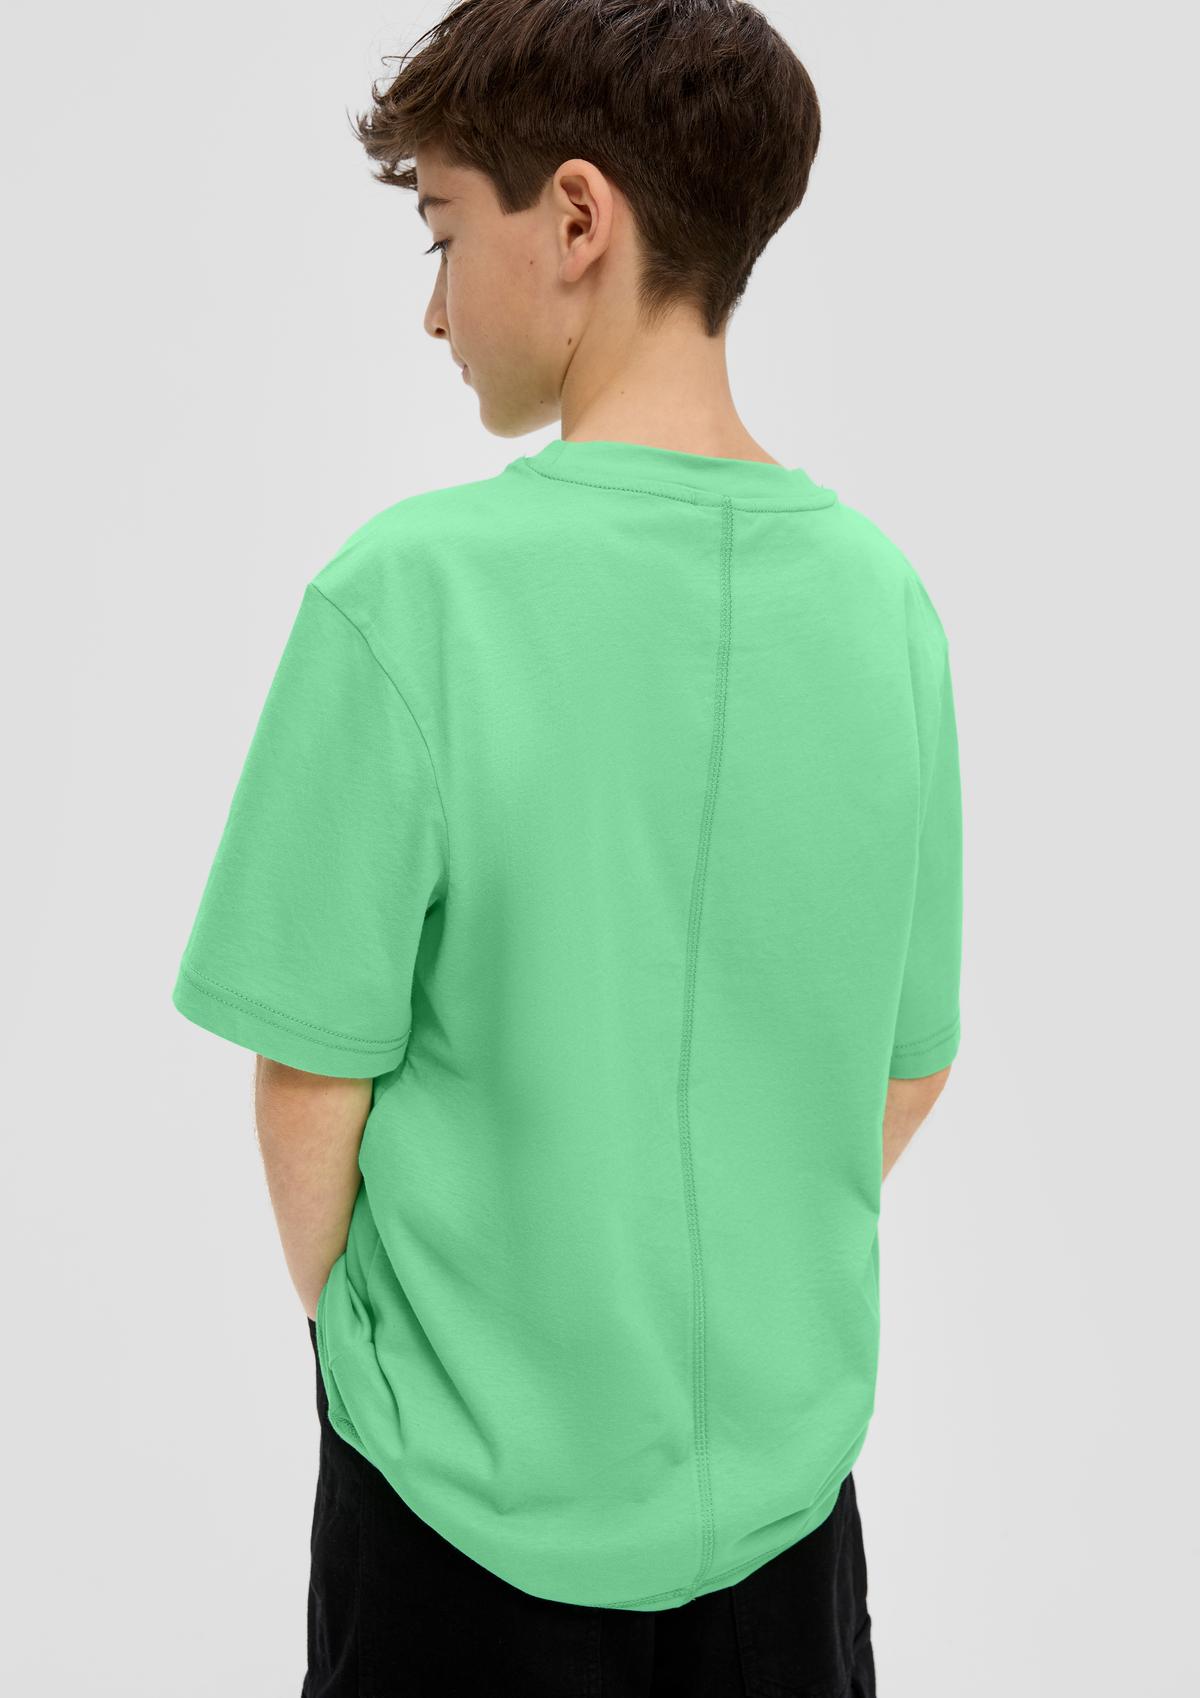 s.Oliver Cotton top with printed lettering